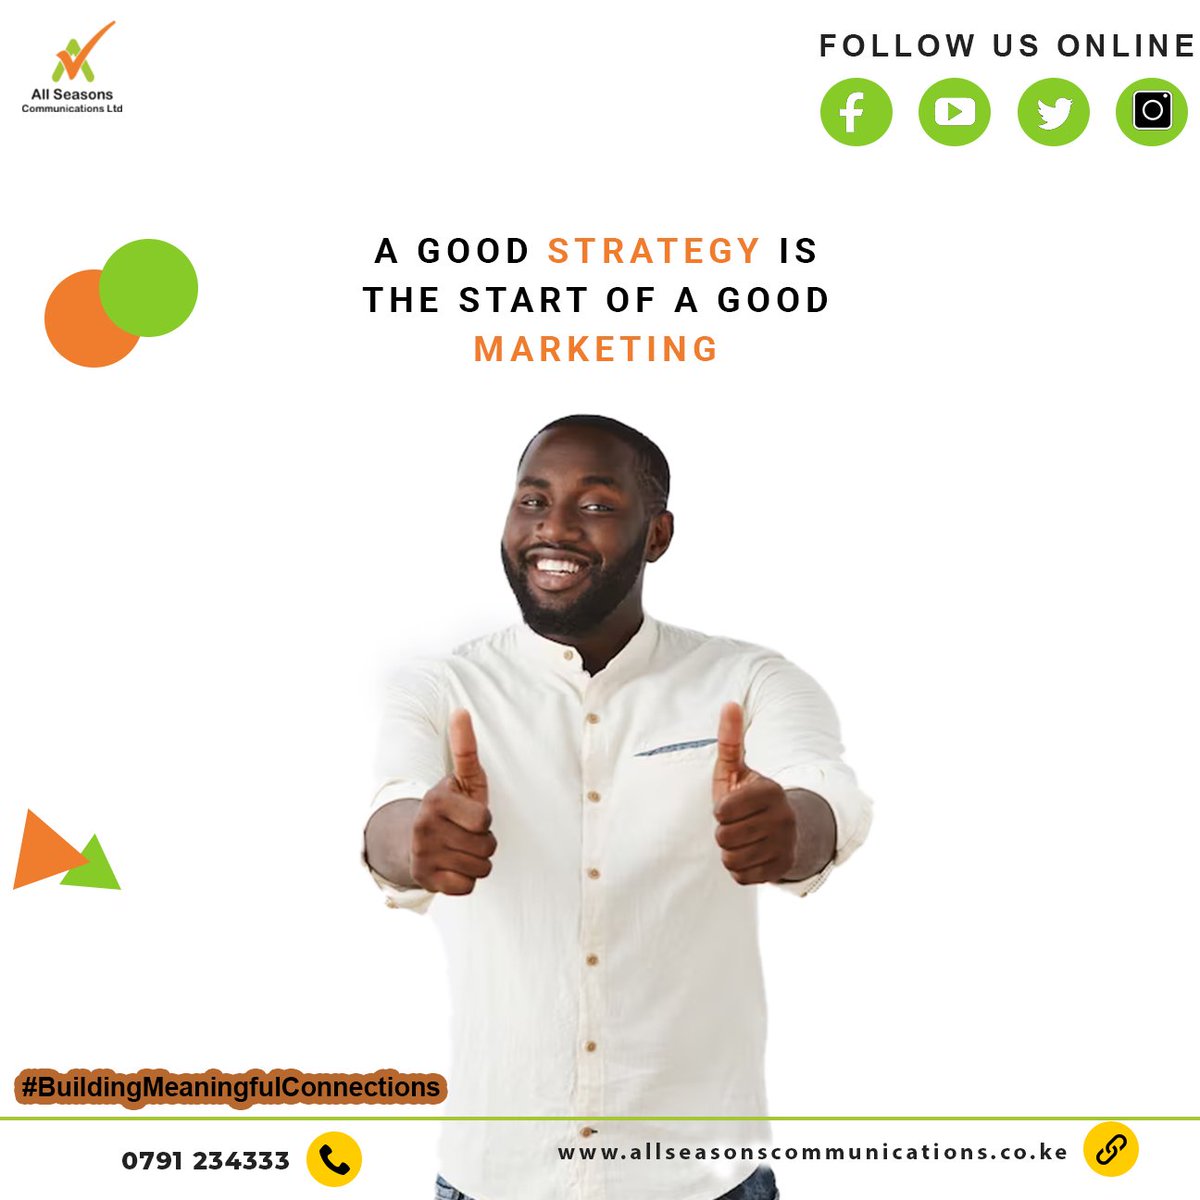 Ready, set,  succeed! A solid strategy is a fuel that drives your marketing engine.  Let's ignite your brand's growth with a winning plan.🚀🔥

#BuildingMeaningfulConnections #MarketingStrategy #BrandGrowth #Success